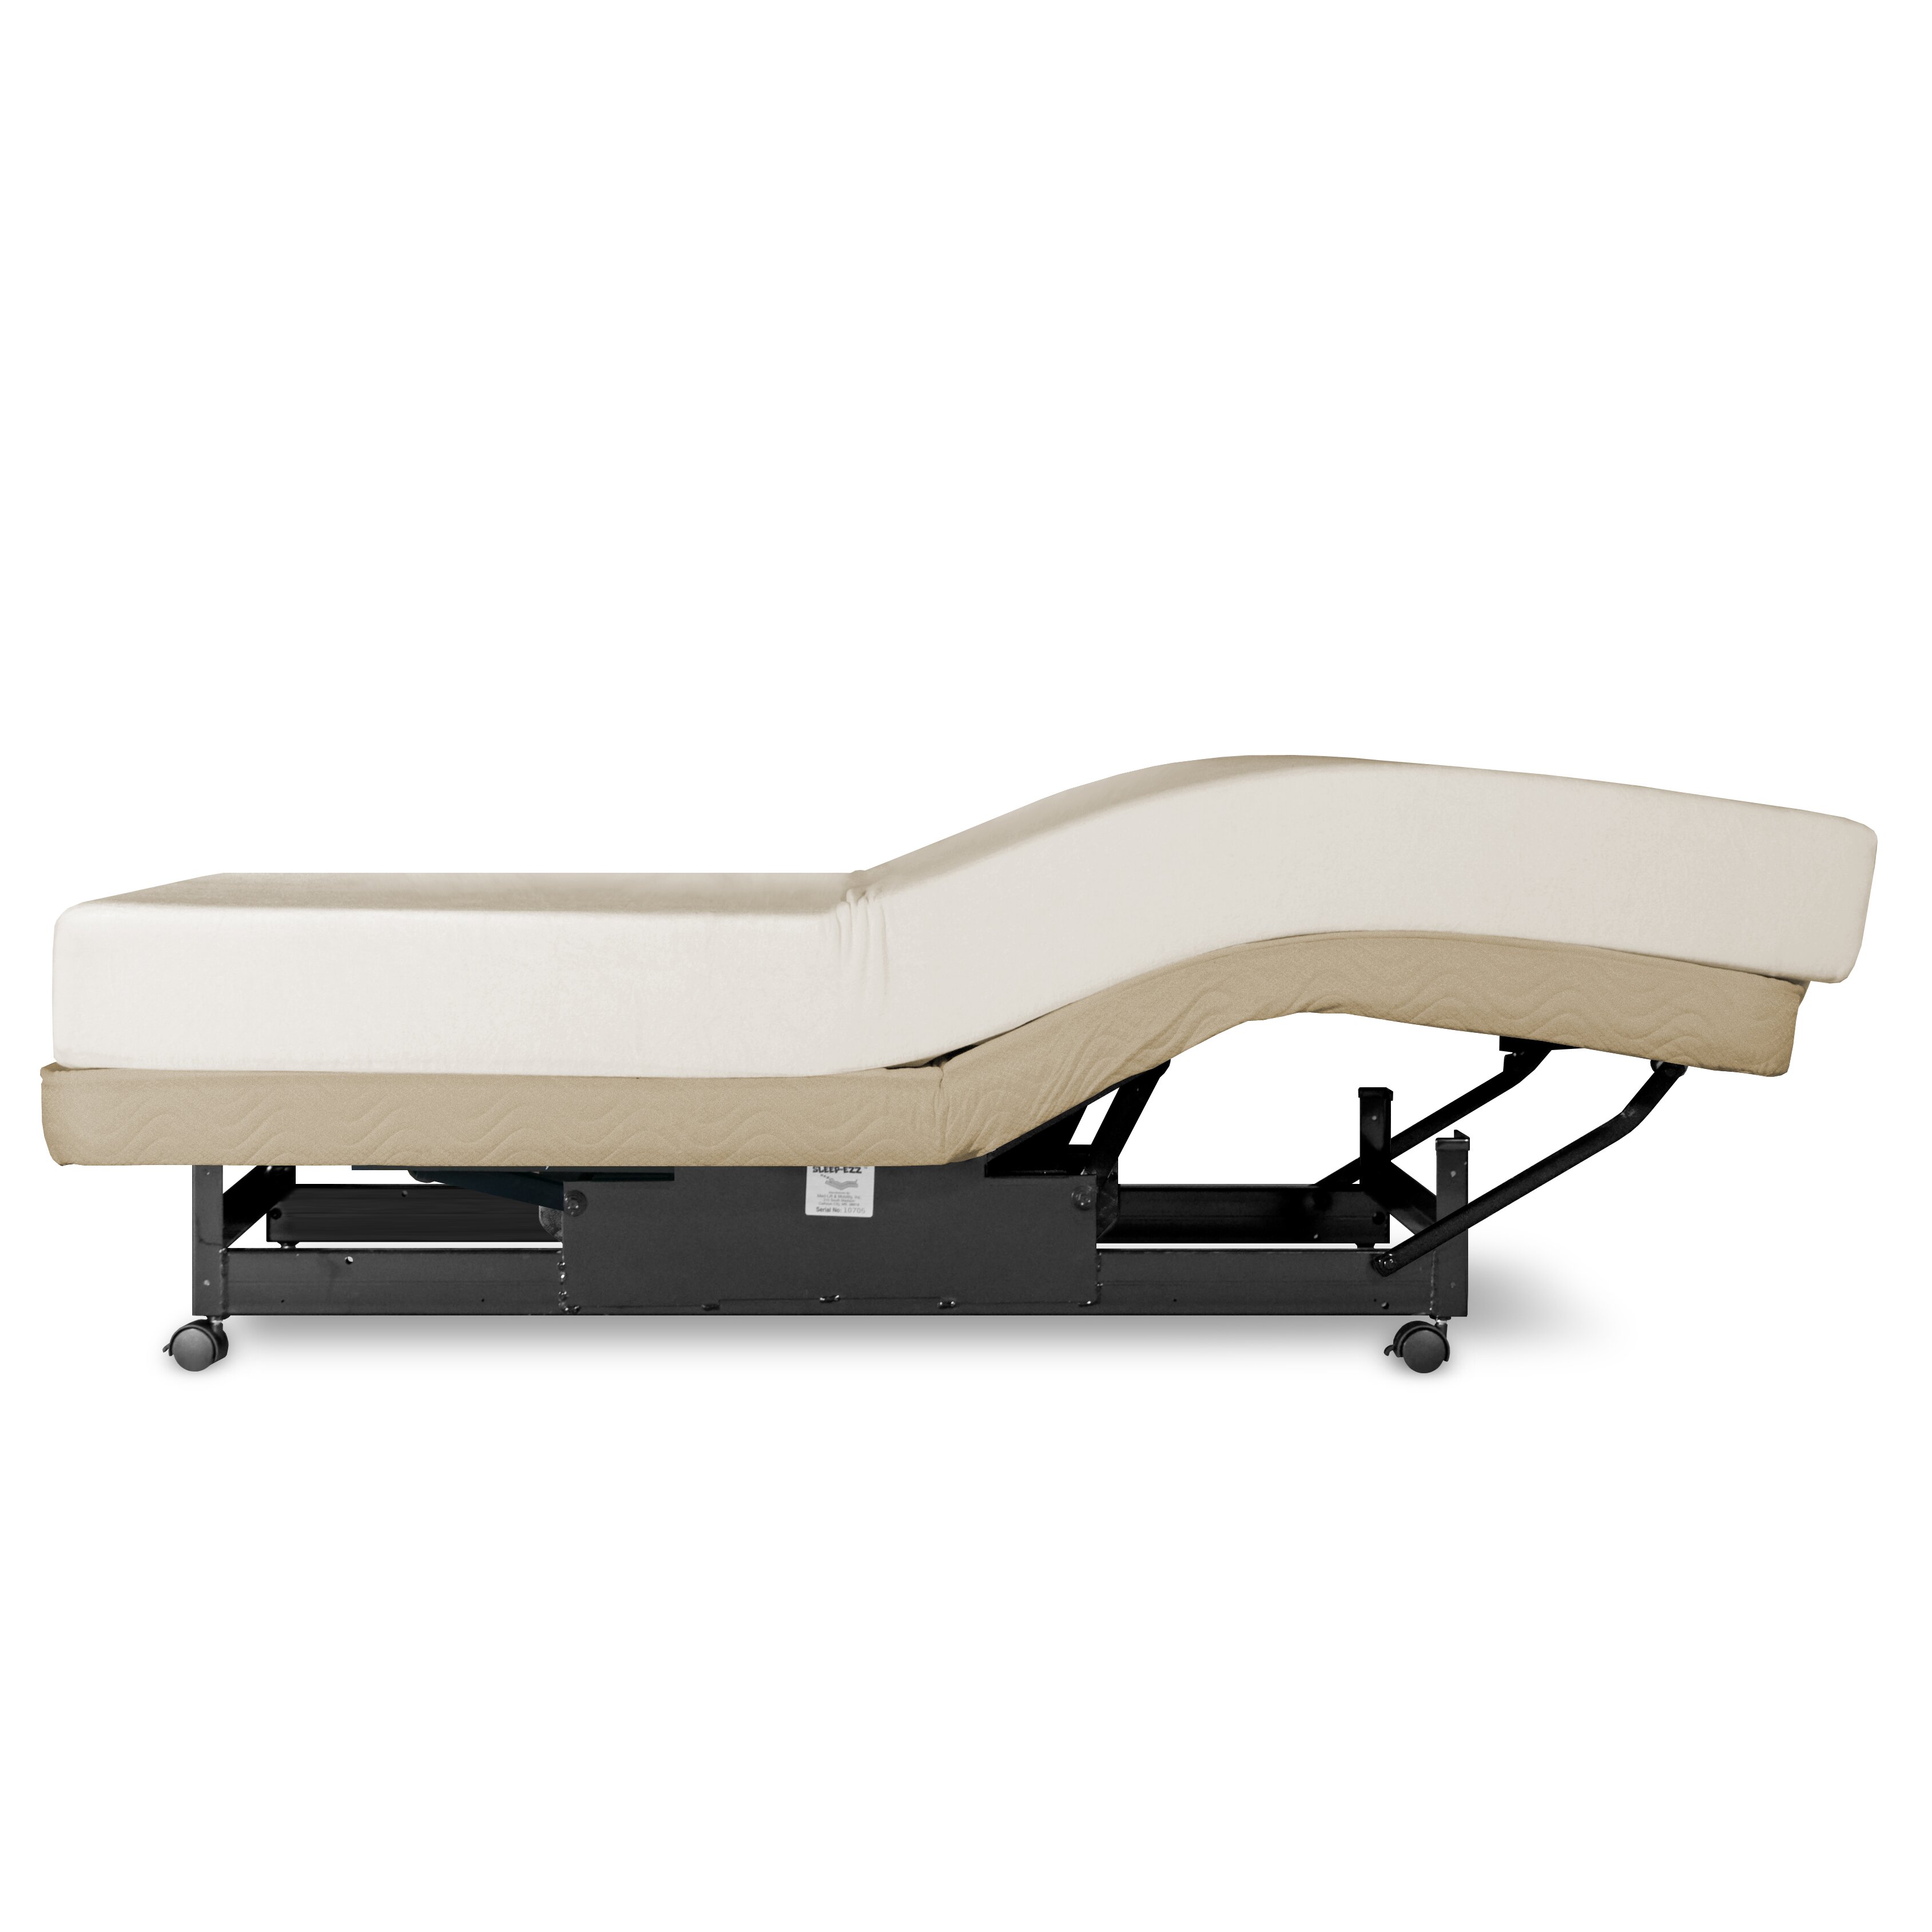 Med-Lift Economy Adjustable Bed Frame - Twin XL & Reviews | Wayfair